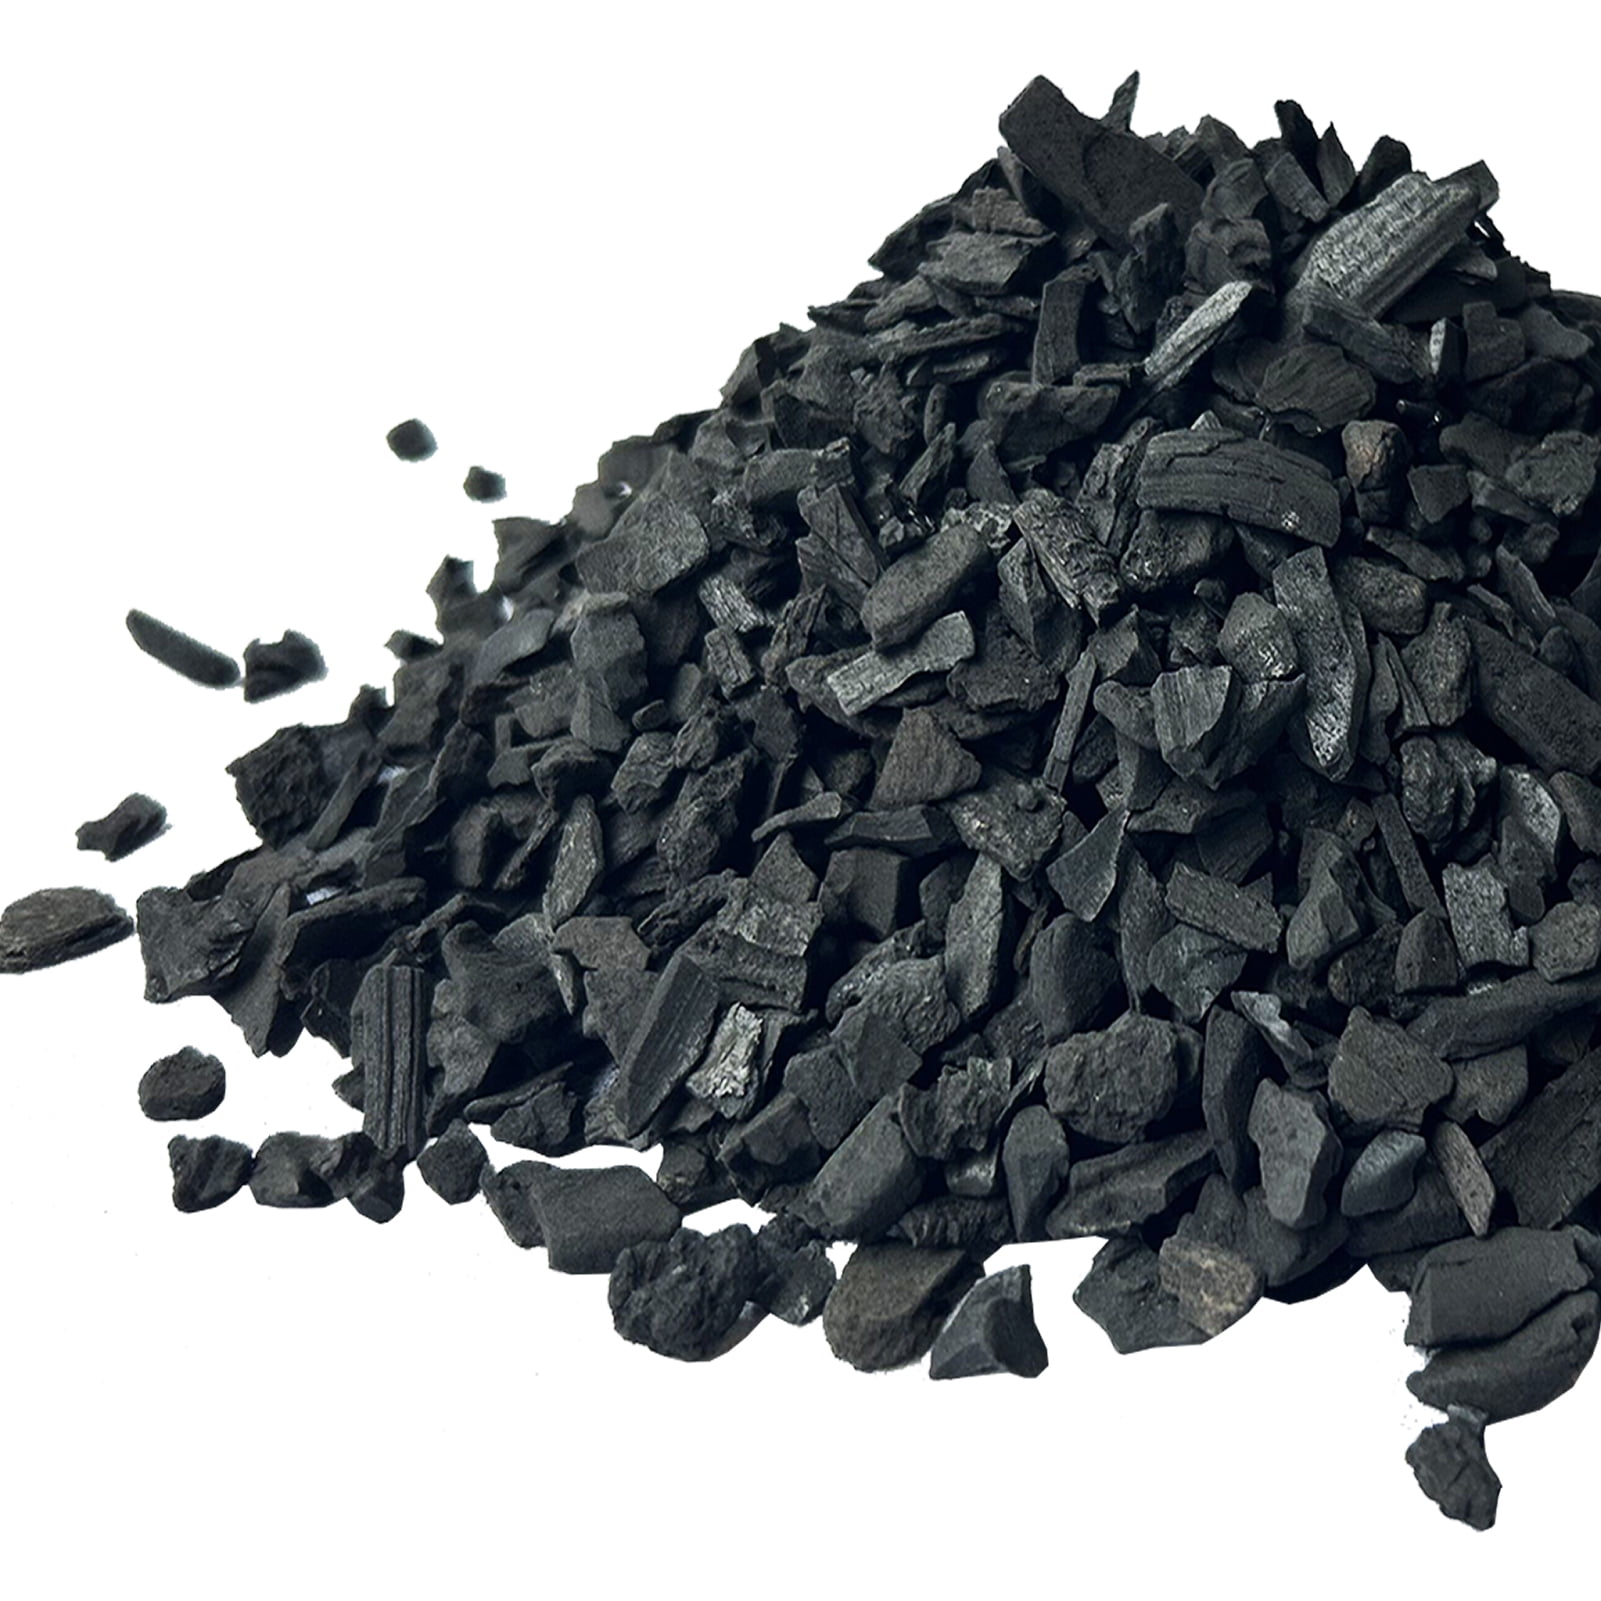 Horticultural charcoal